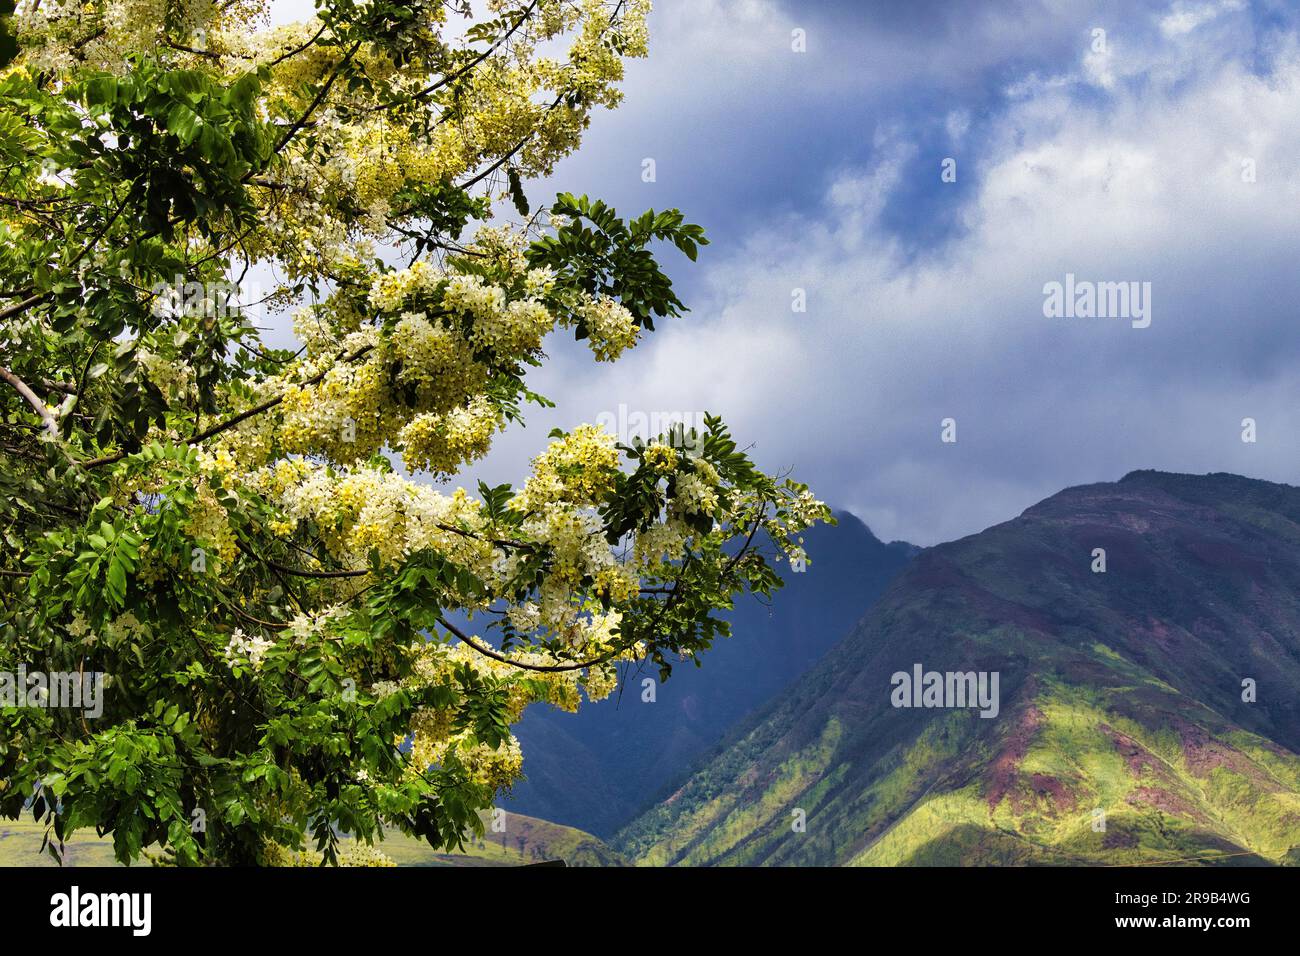 Golden shower trr blooming on maui. Stock Photo